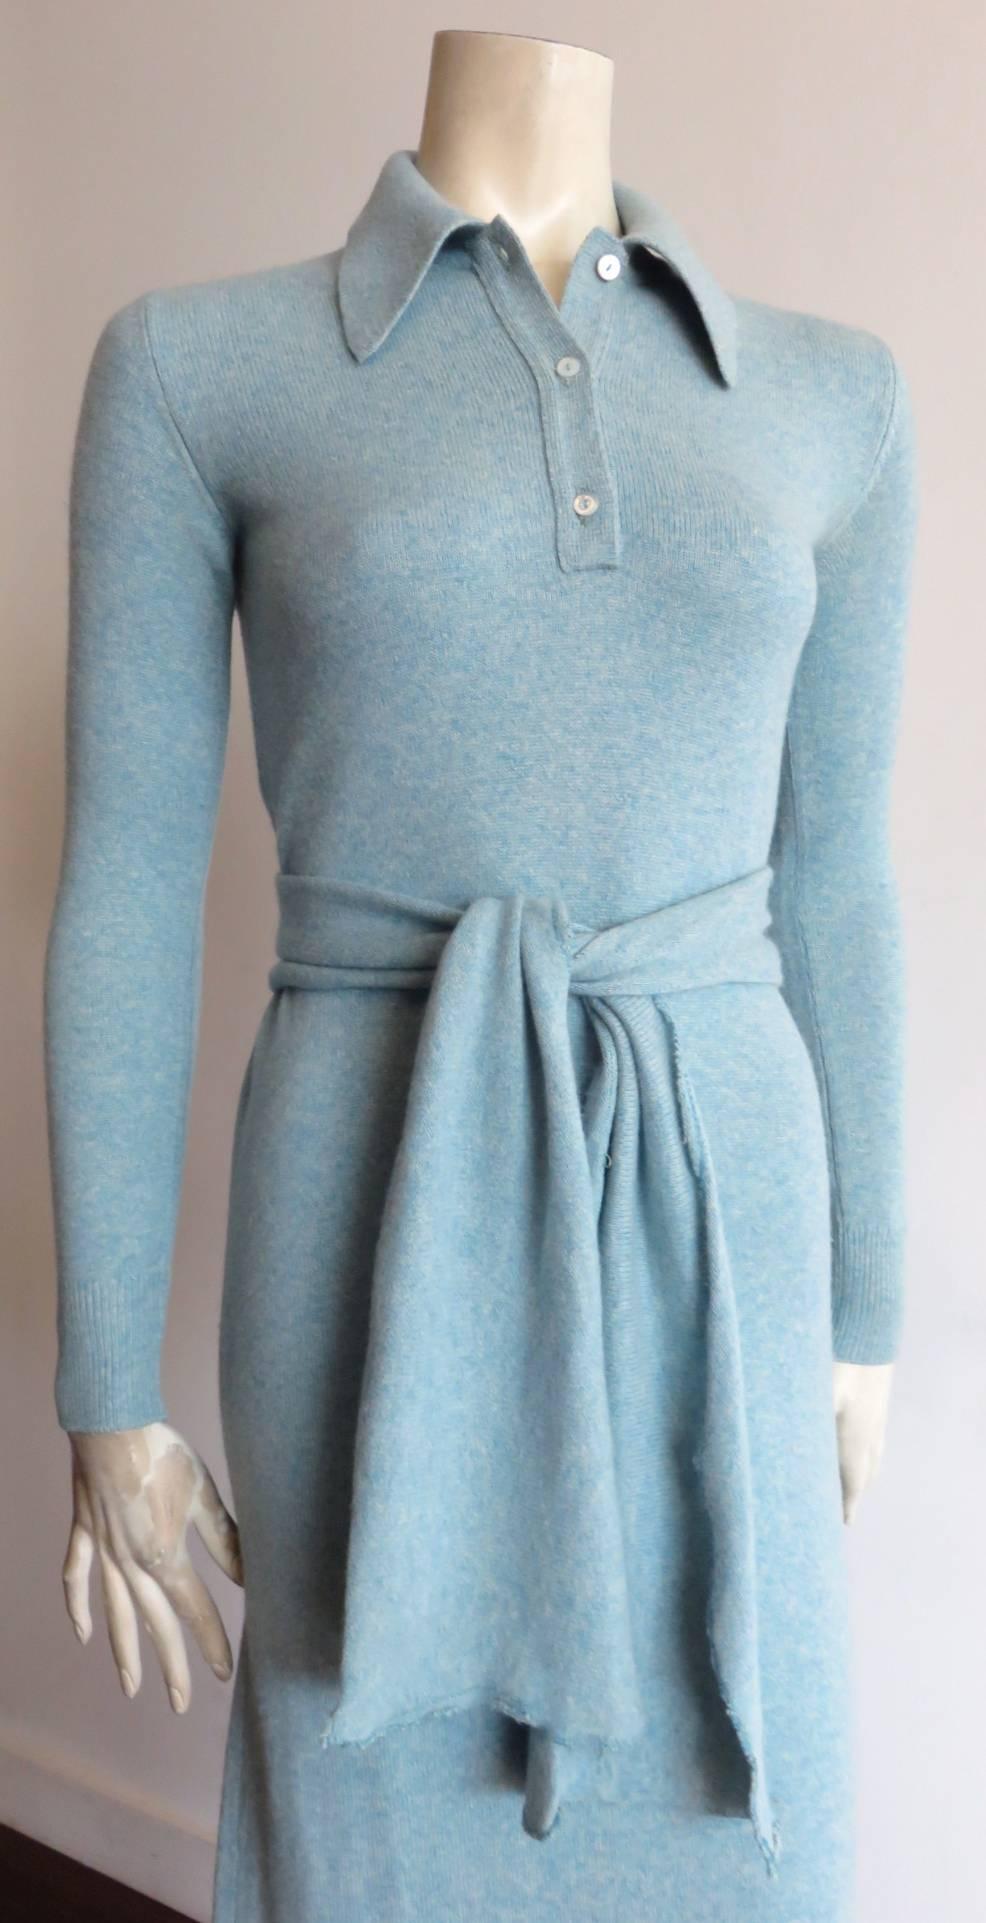 1970's HALSTON Pure cashmere belted sweater dress in light blue melange knit.

Luxury, Scottish cashmere fabrication in Halston's signature, long & lean, 70's silhouette with generously shaped, collar.

Fully fashioned at the armholes with pearl